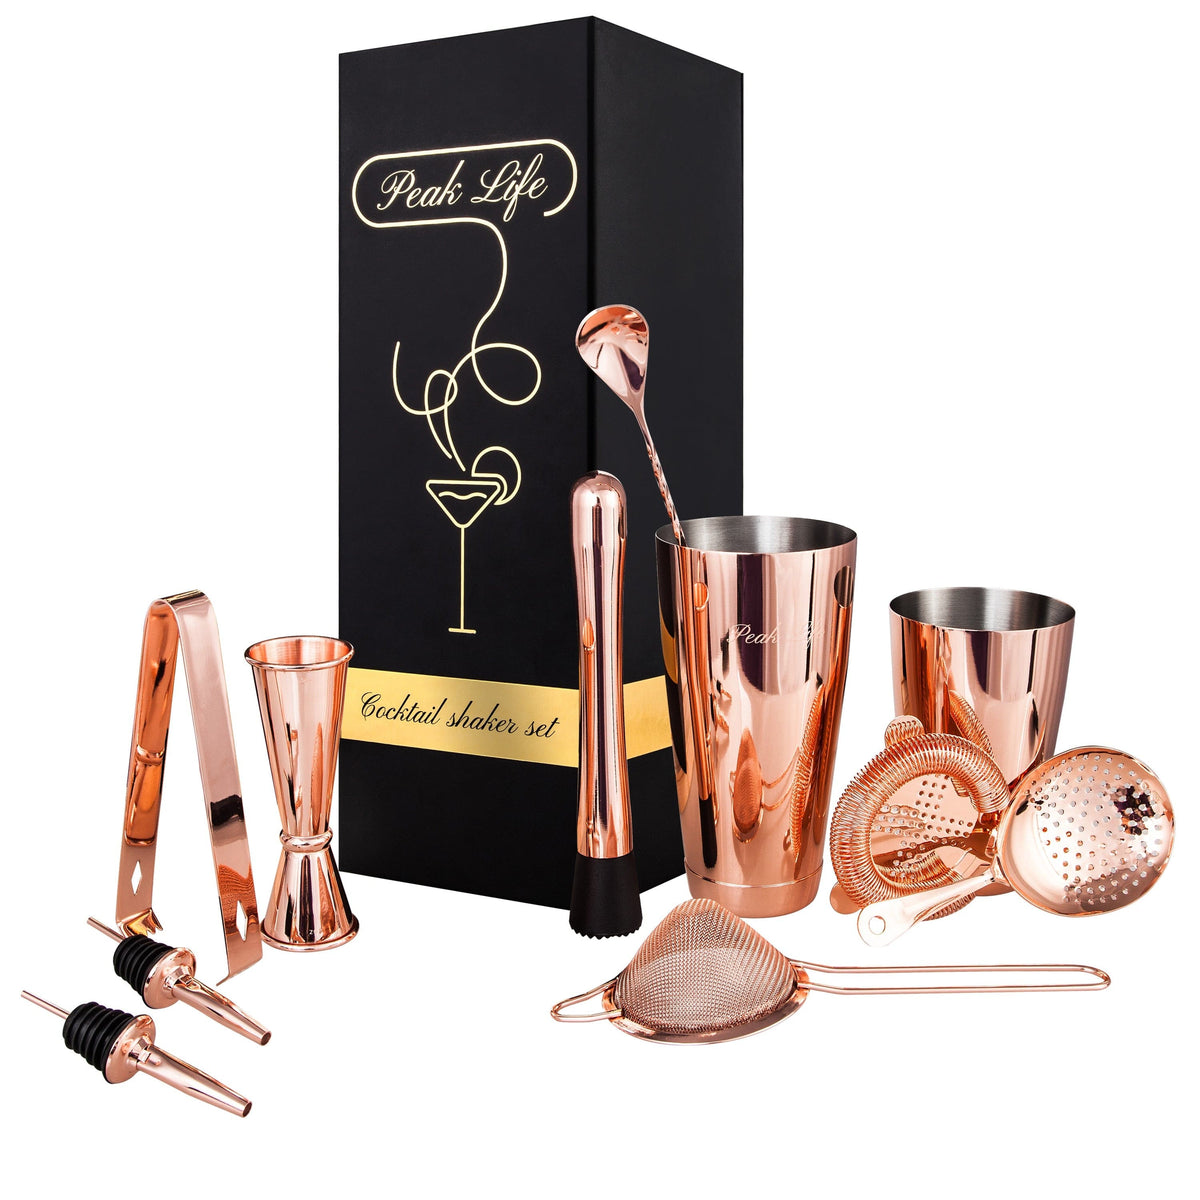 Personalized Boston Cocktail Shaker Professional Bartender Kit - Copper Color.